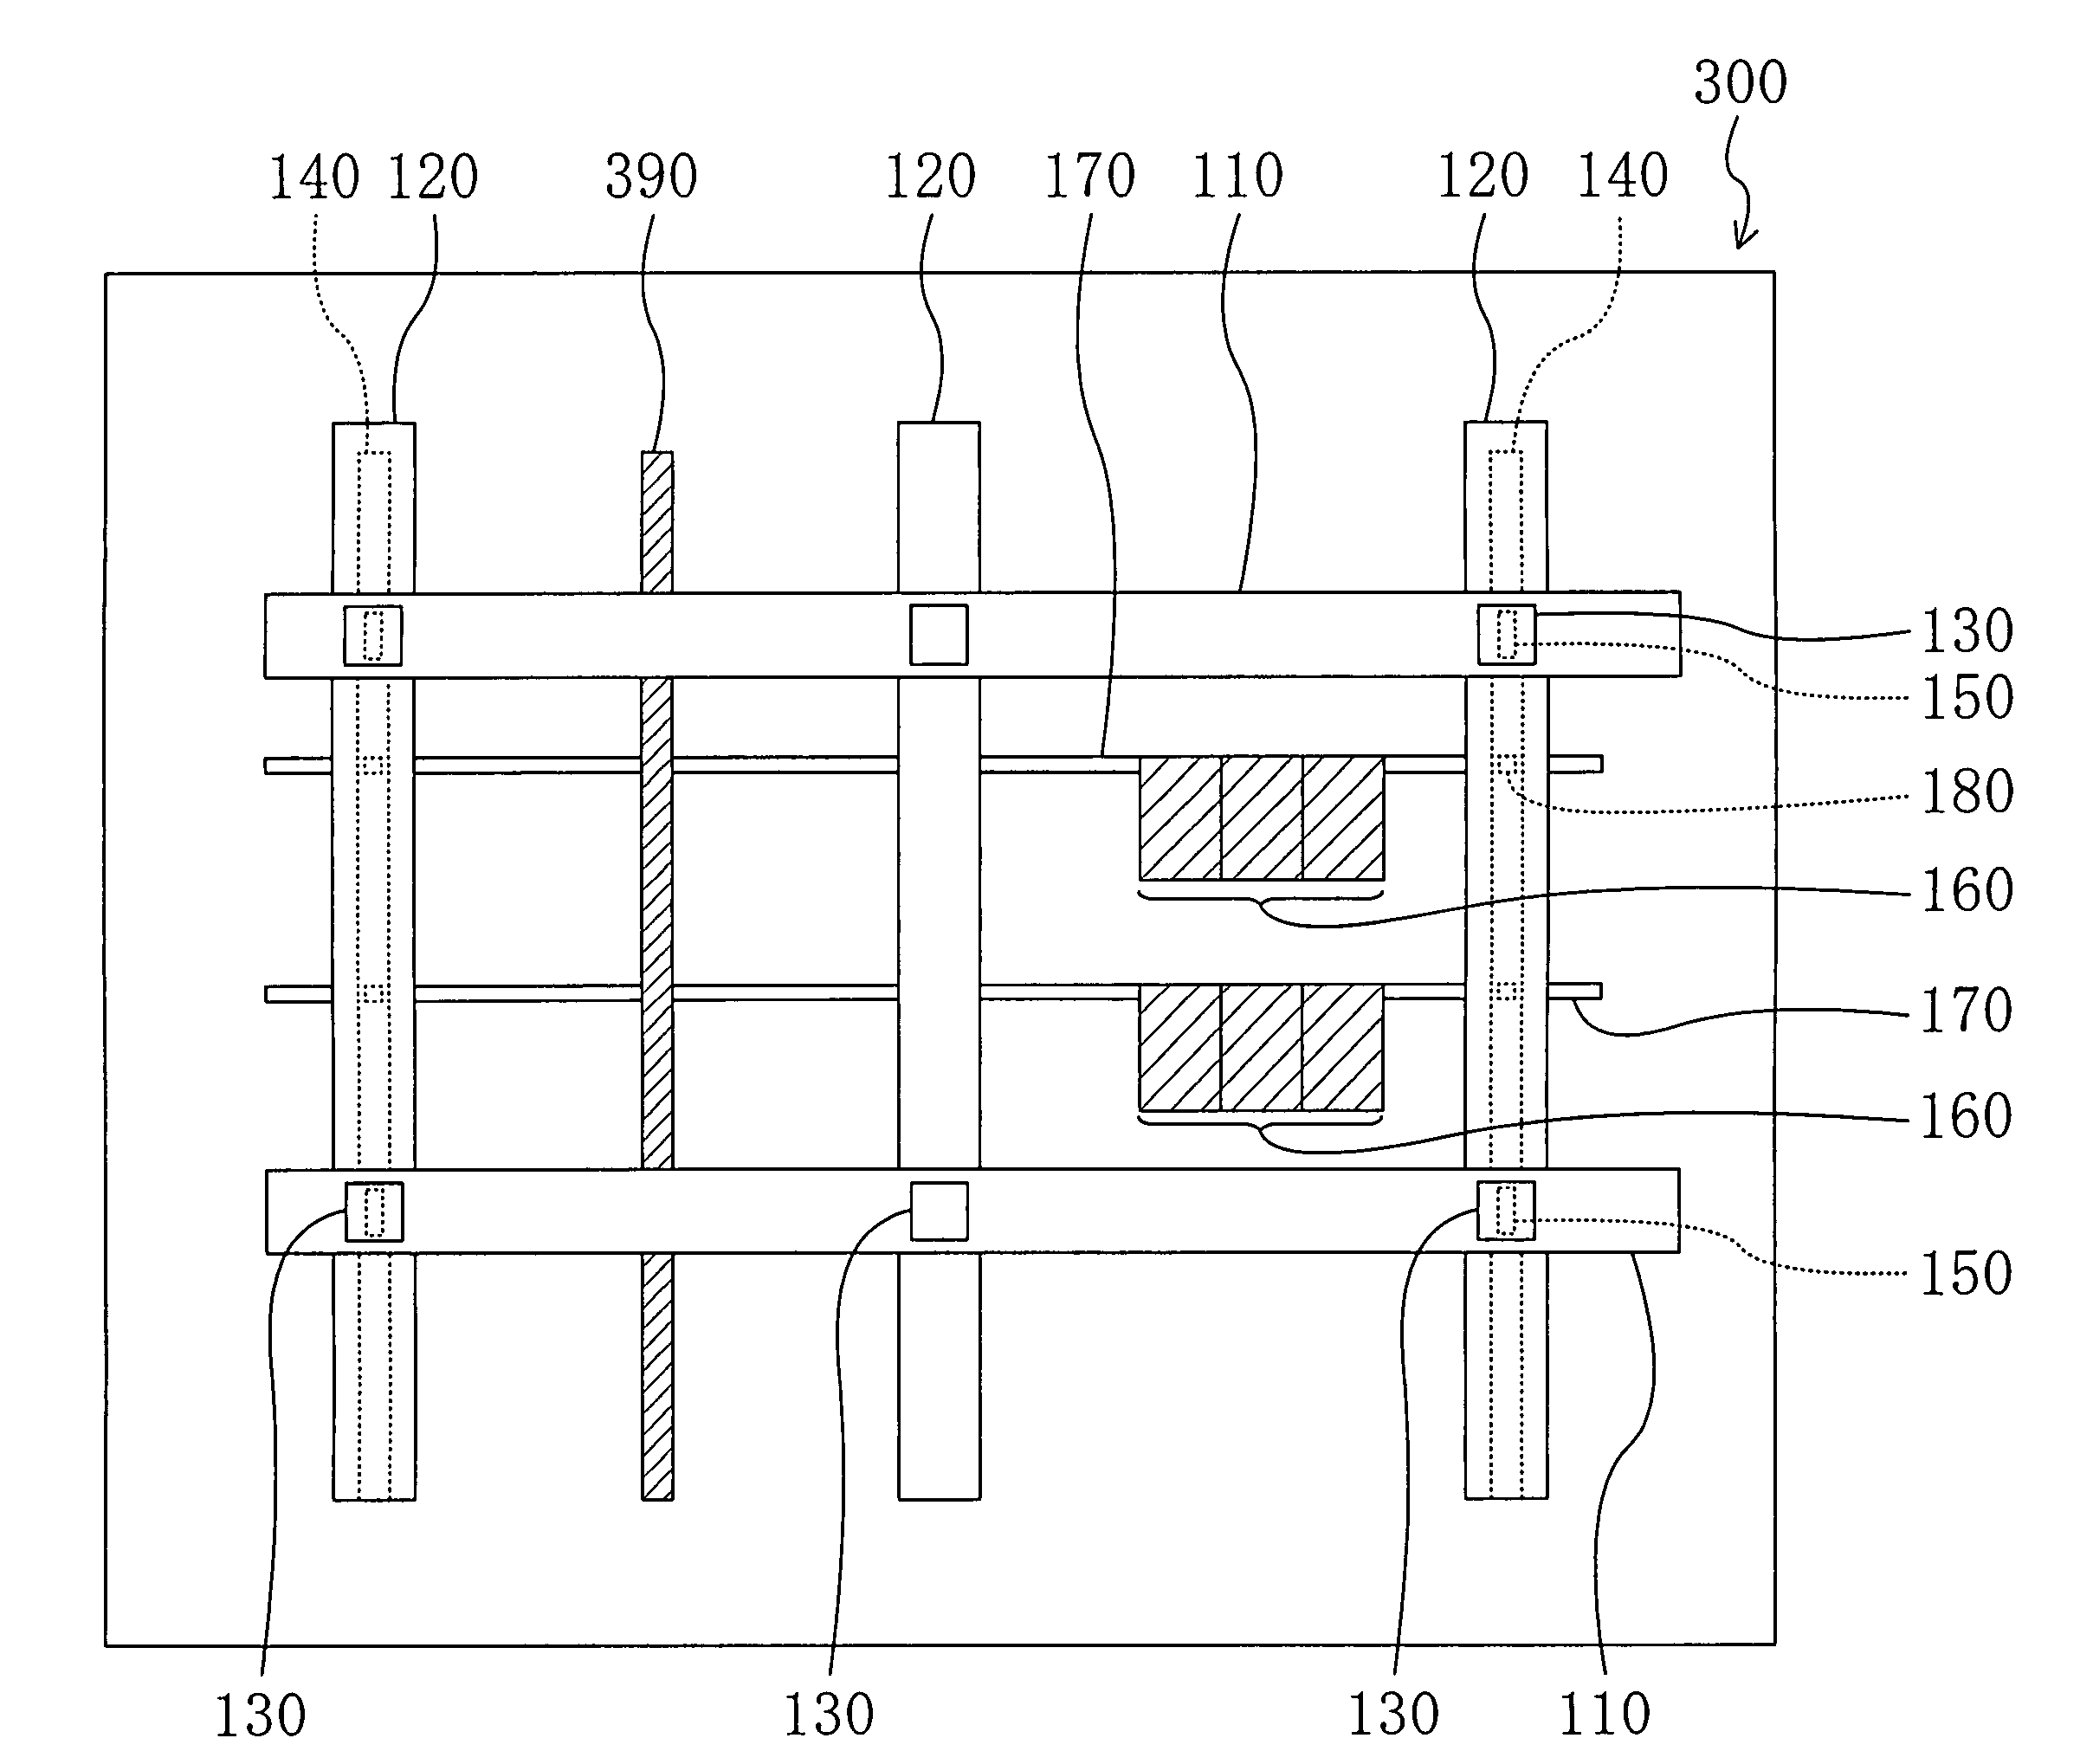 Wiring structure of a semiconductor device